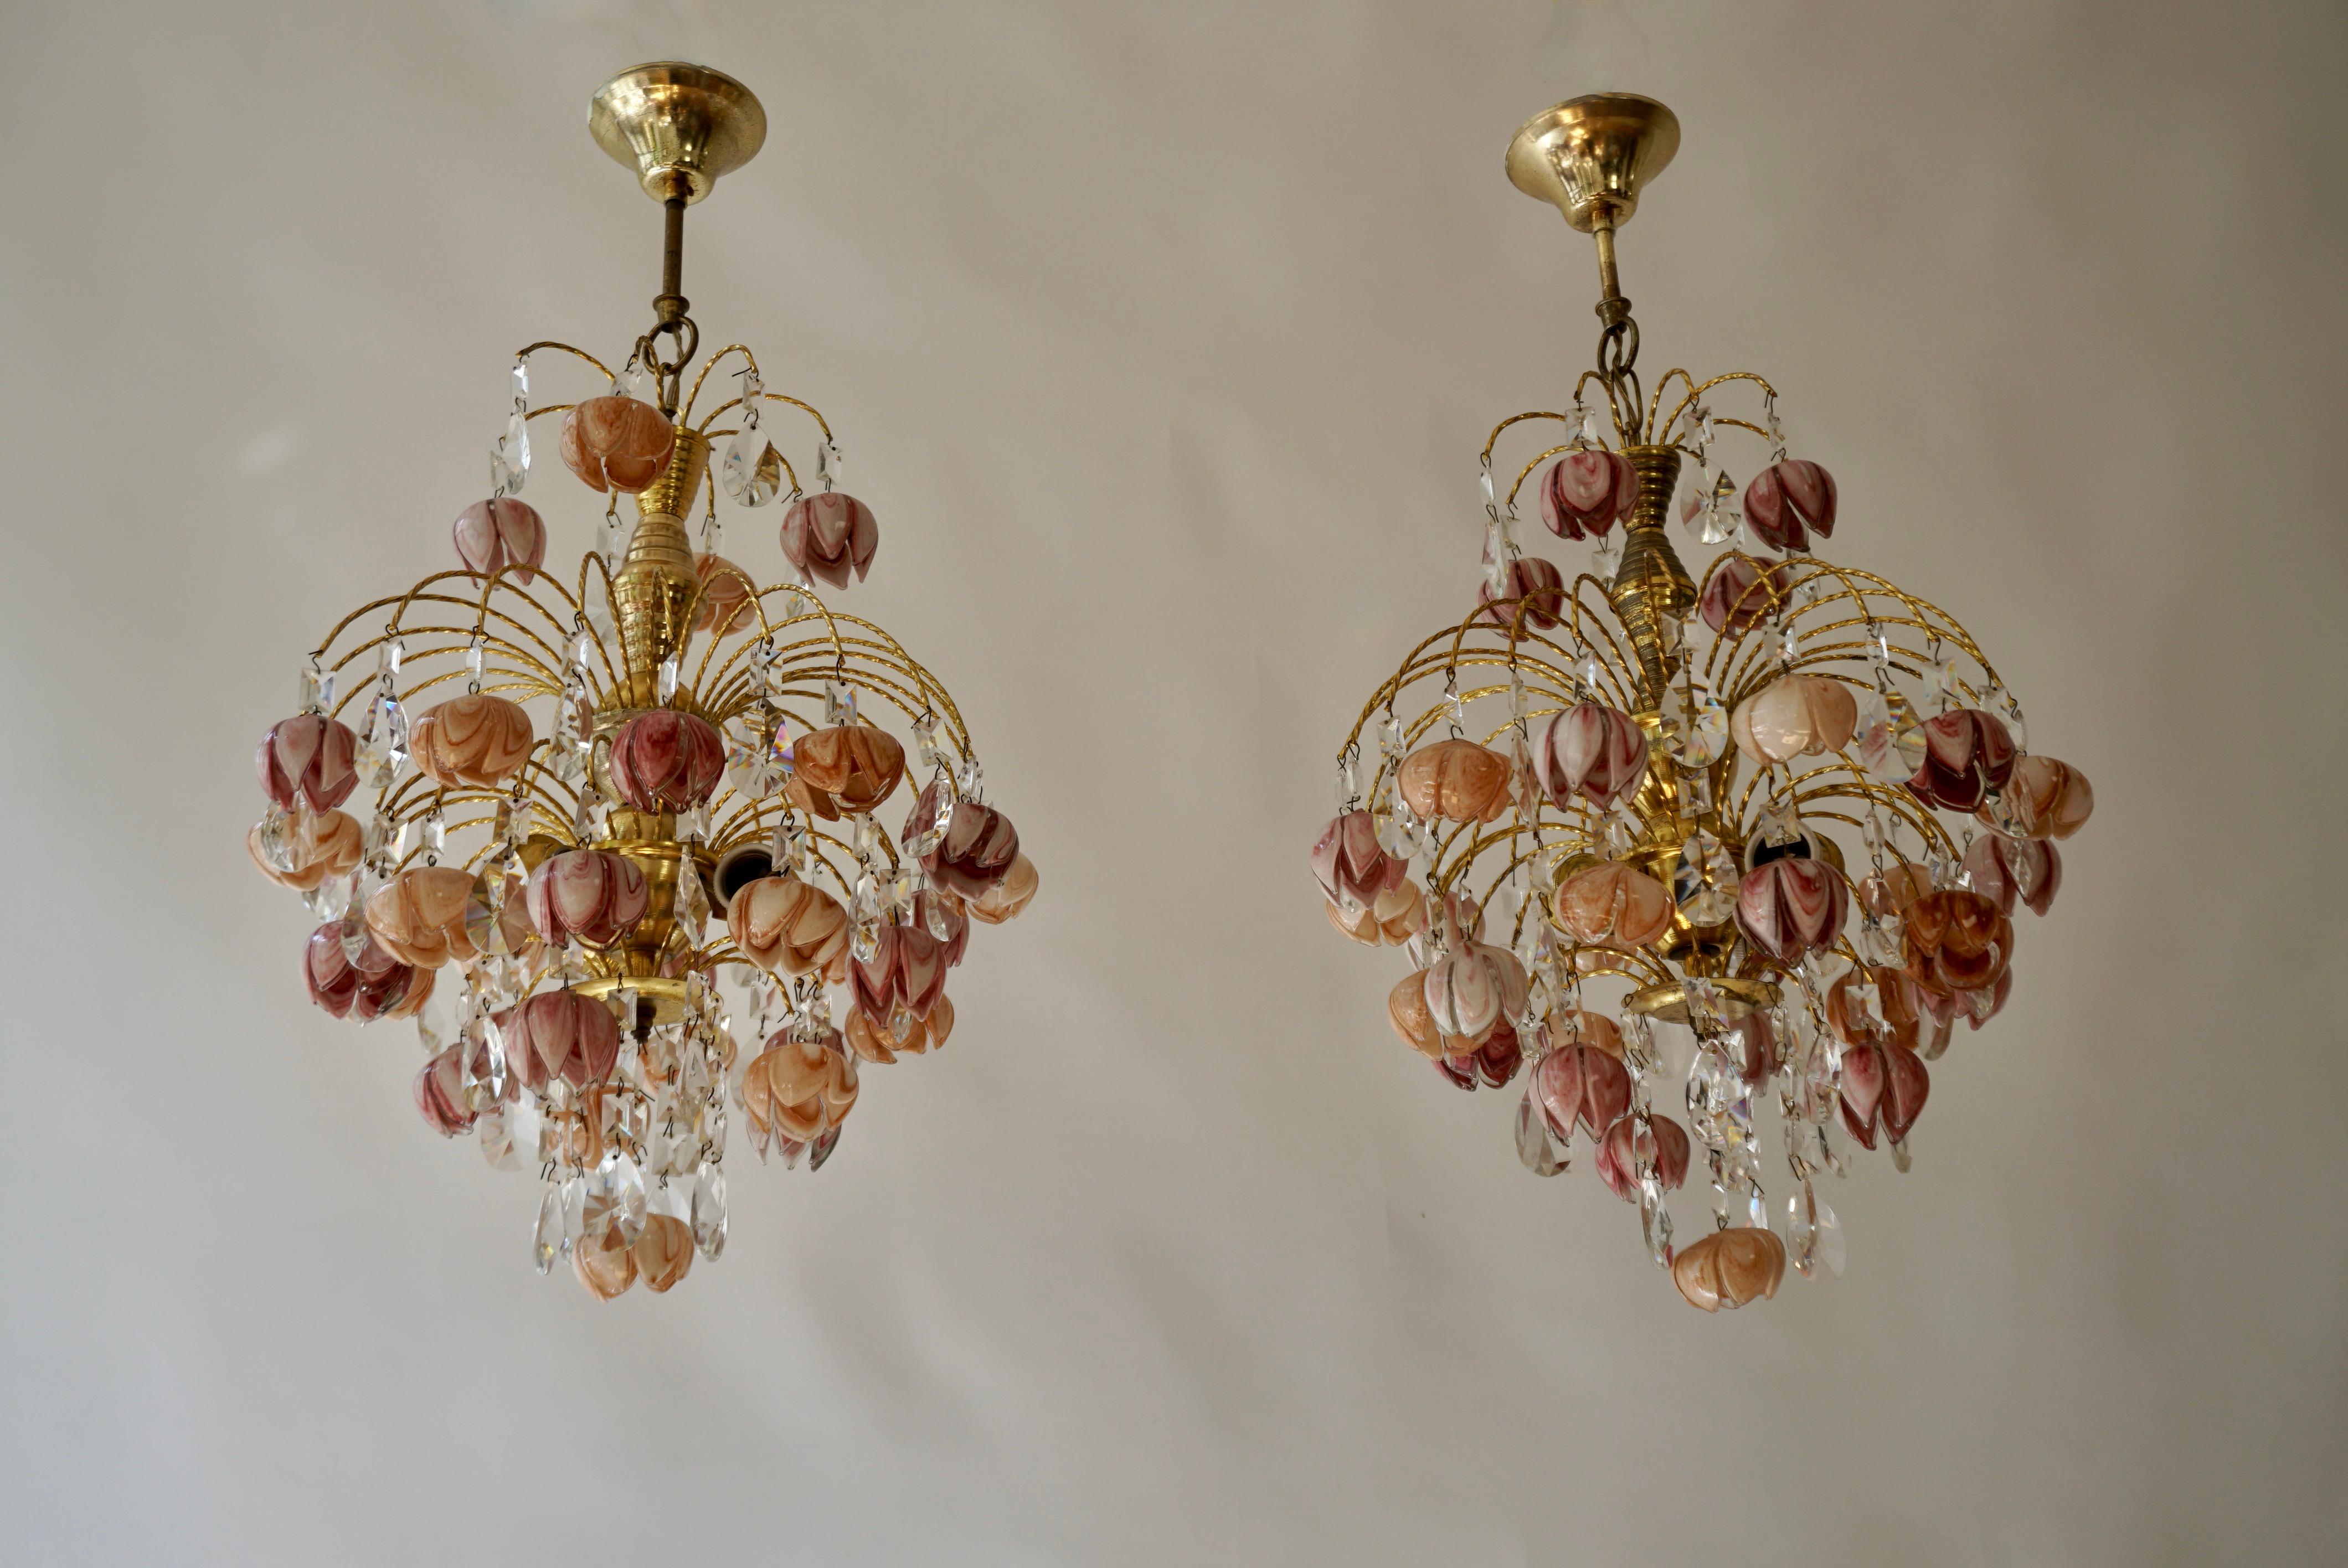 Pair of Murano Glass Floral Chandeliers, Italy, 1970s For Sale 9